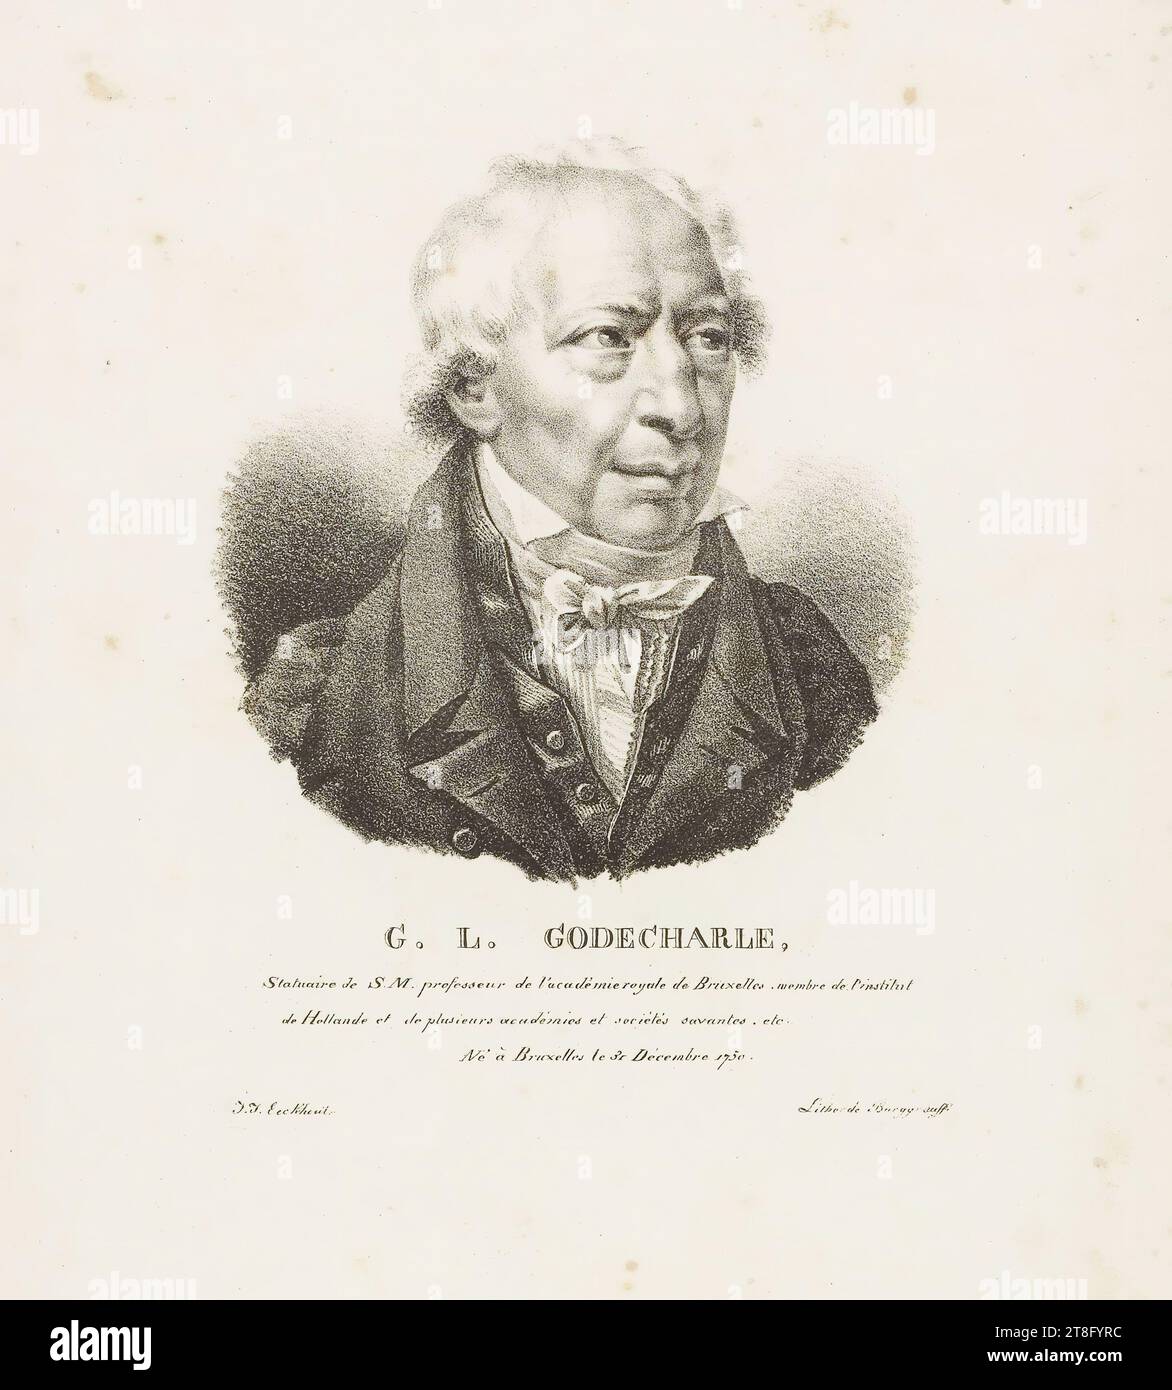 G. L. GODECHARLE, Statuary of H.M. professor of the royal academy of Brussels, member of the institute, of Holland and of several academies and learned societies. etc., Born in Brussels on December 31, 1750. J.J. Eeckhout fecit. Lithg of Burggraaff. illustration from: Collection of portraits of modern artists, born in the Kingdom of the Netherlands, drawn from nature by J. J. Eeckhout, and lithographed by G. P. Van den Burggraaff. Brussels 1822 Stock Photo